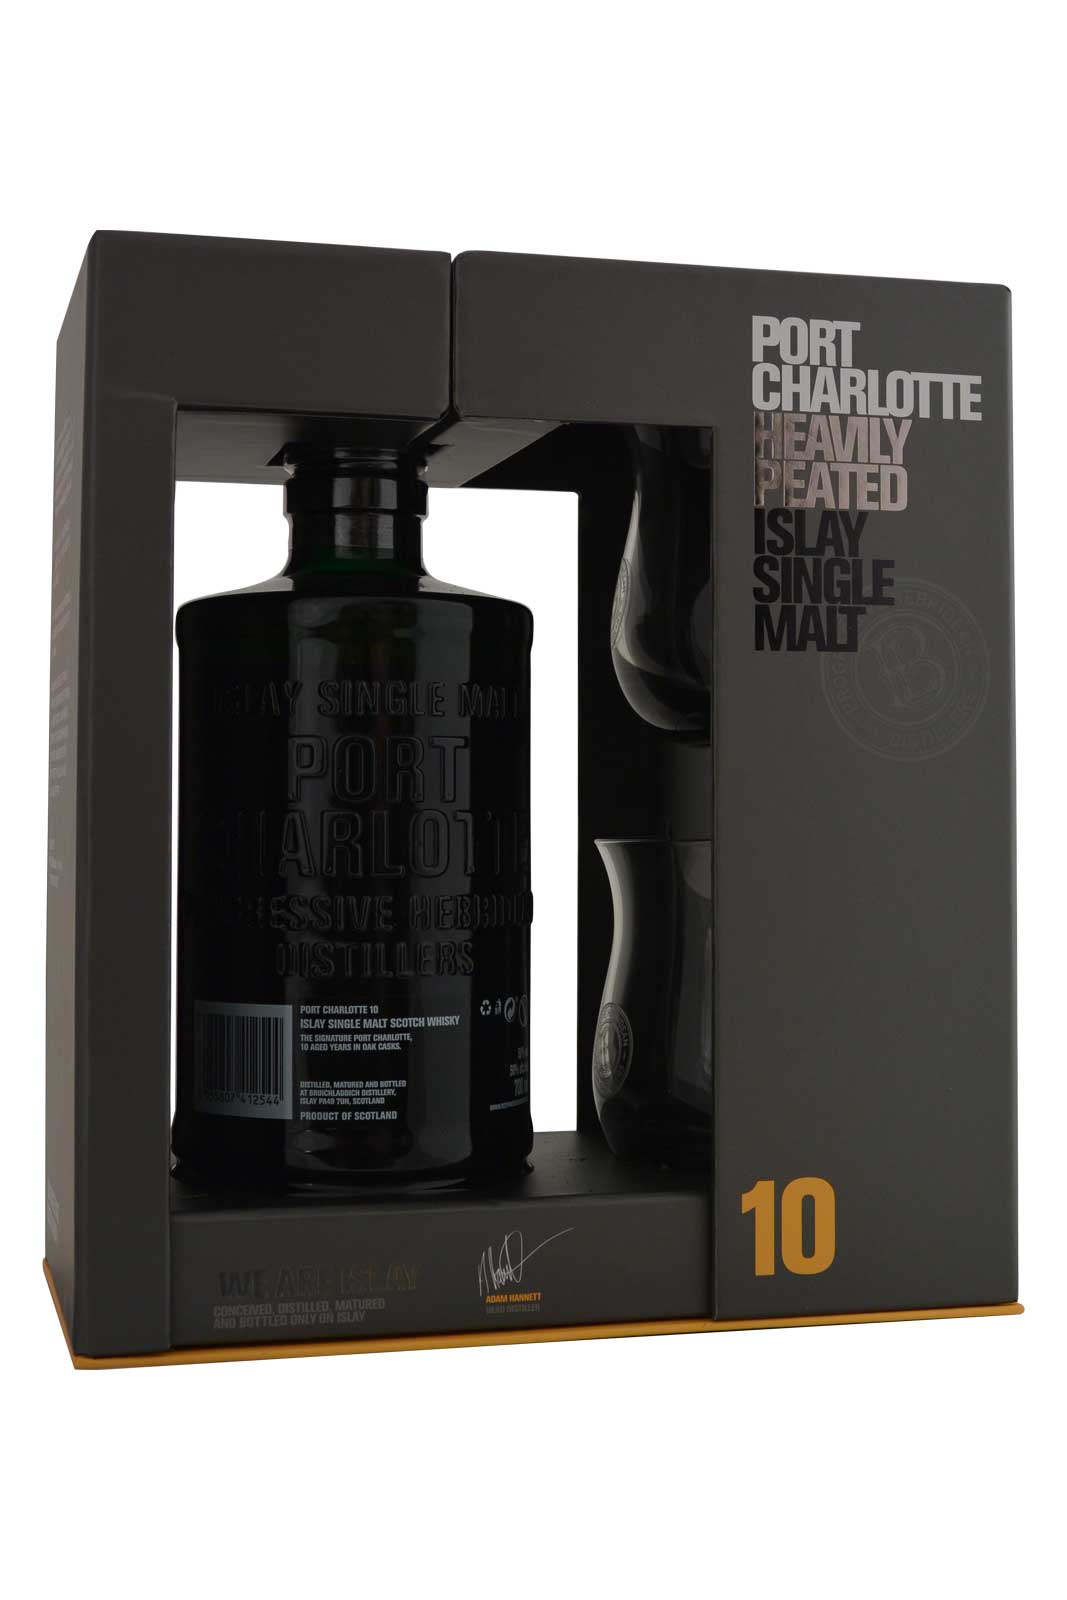 Port Charlotte 10 Year Old  Heavely Peated - Giftbox 2 Glasses